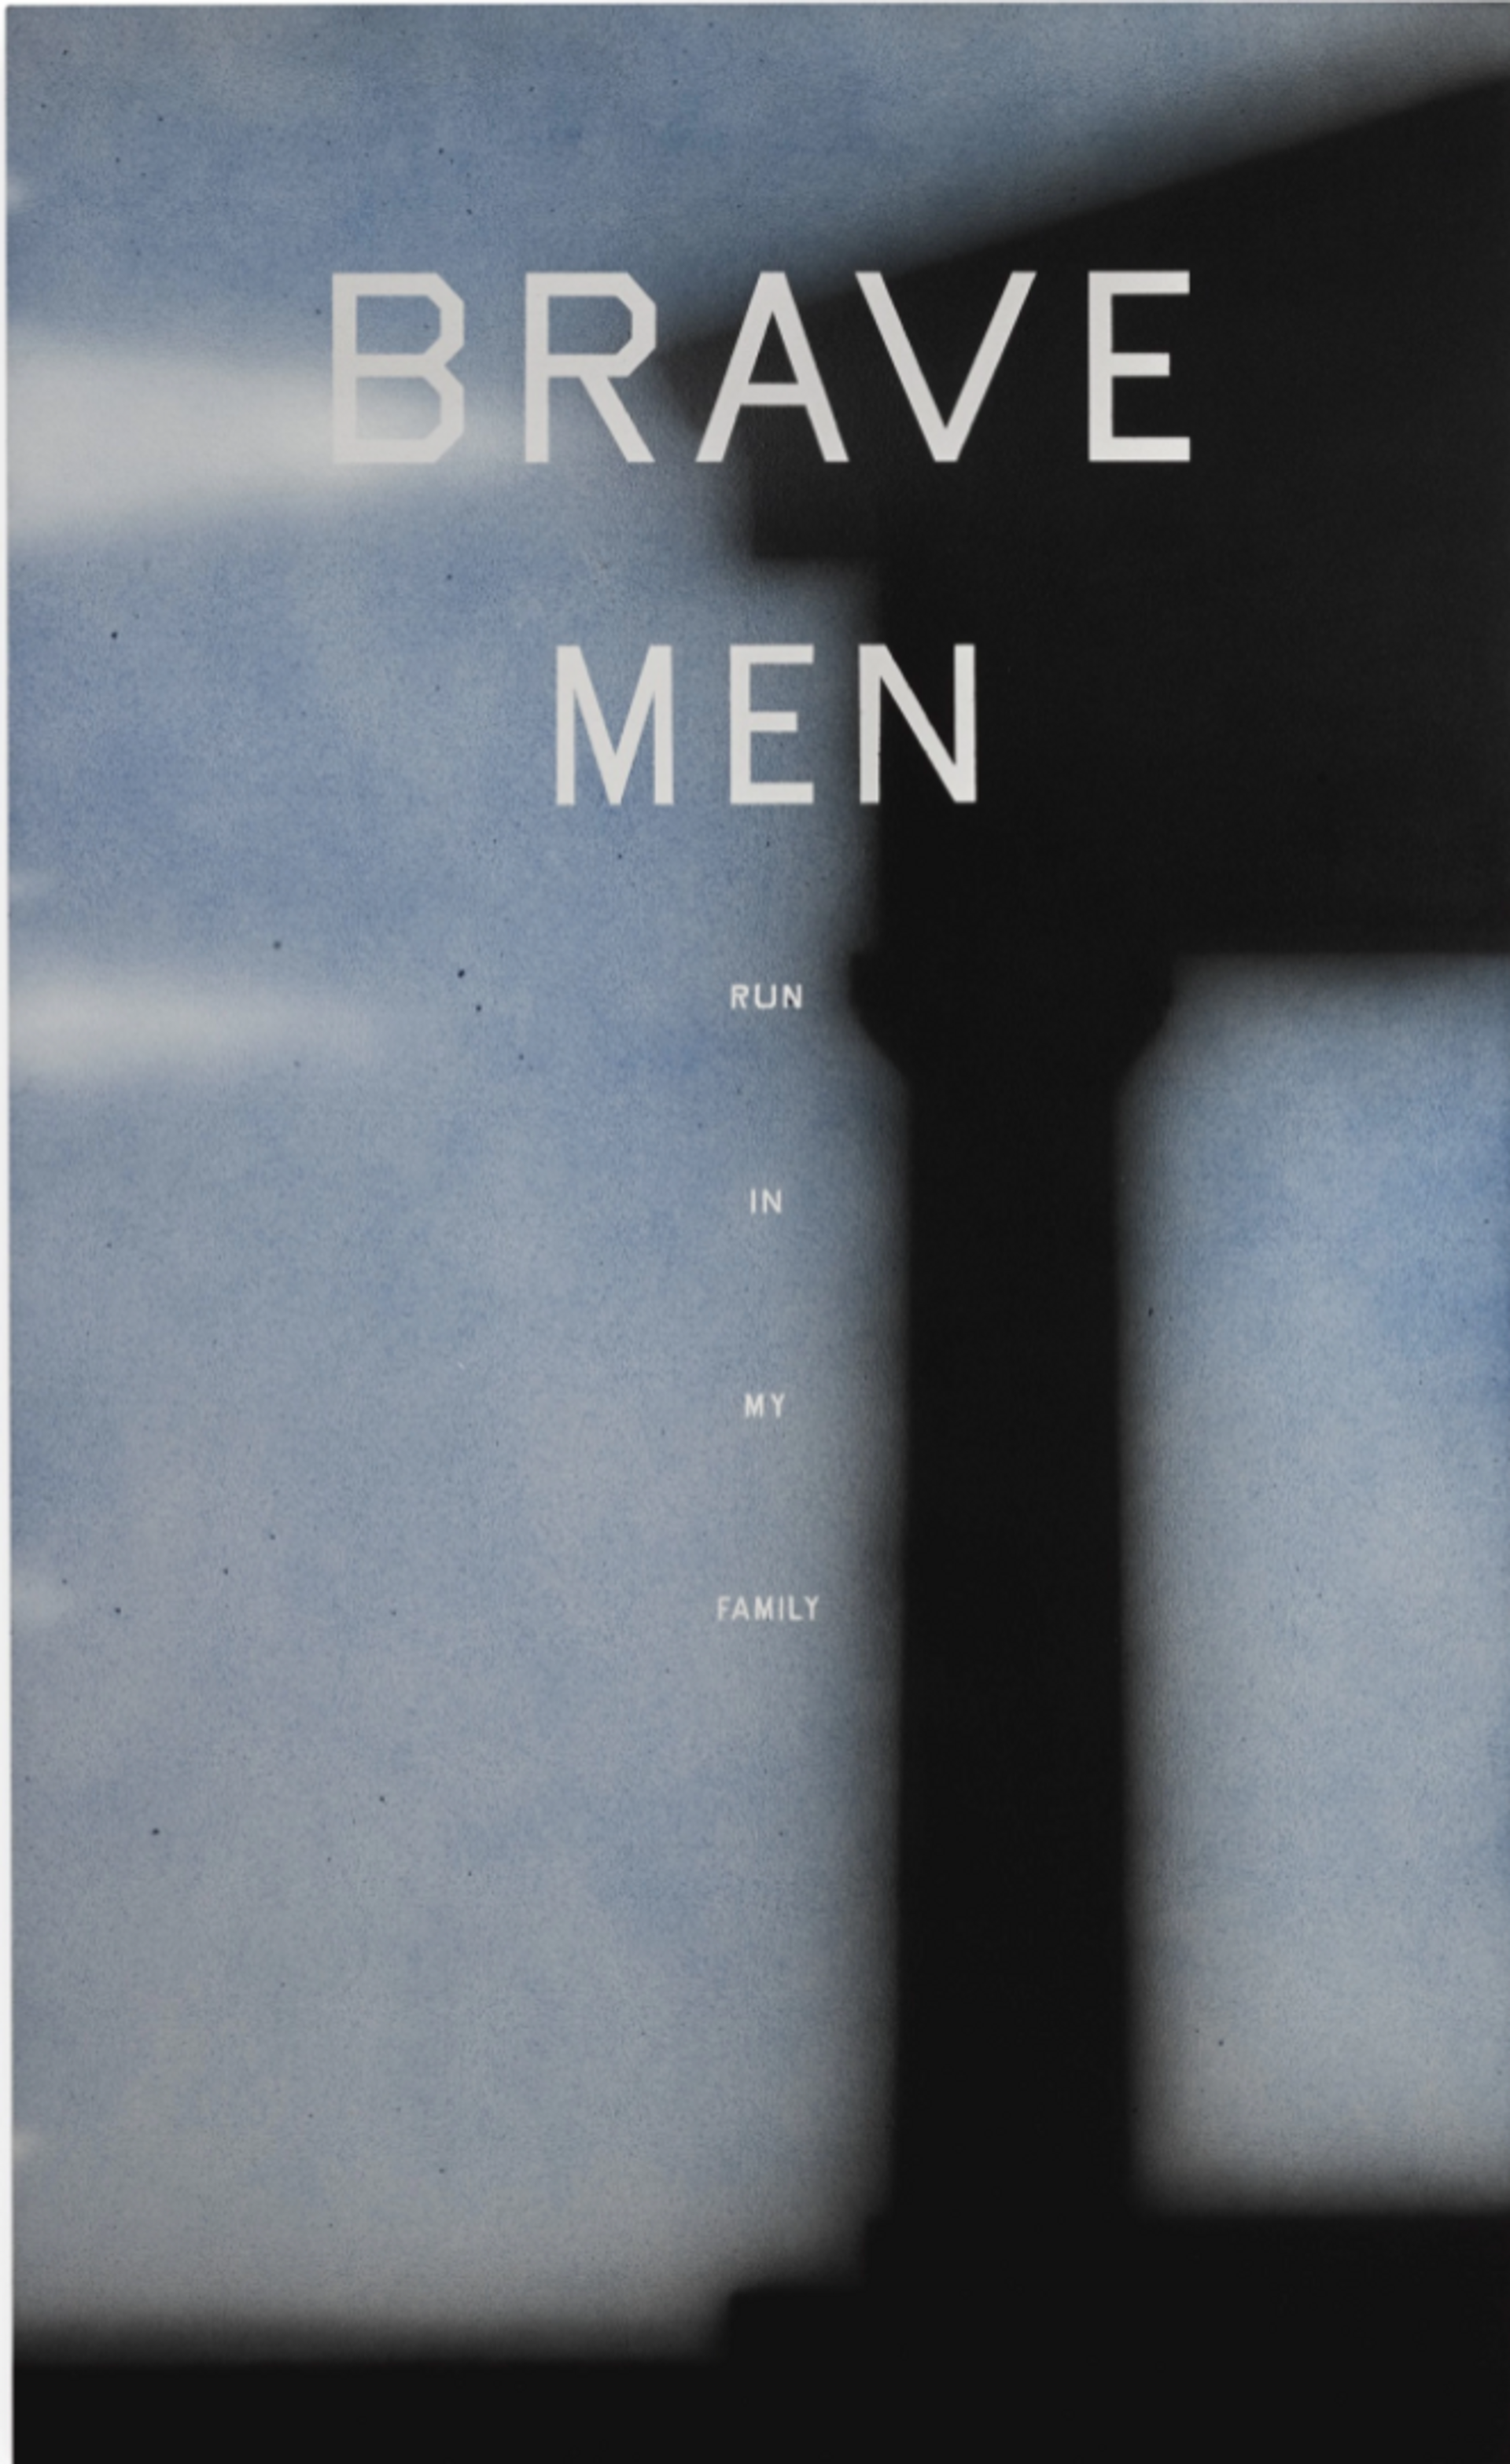 Painting. byEd Ruscha, depicting the words 'brave men run in my family' in stark white lettering, against a blurry black silhouette of a pillar against a grey-blue background.